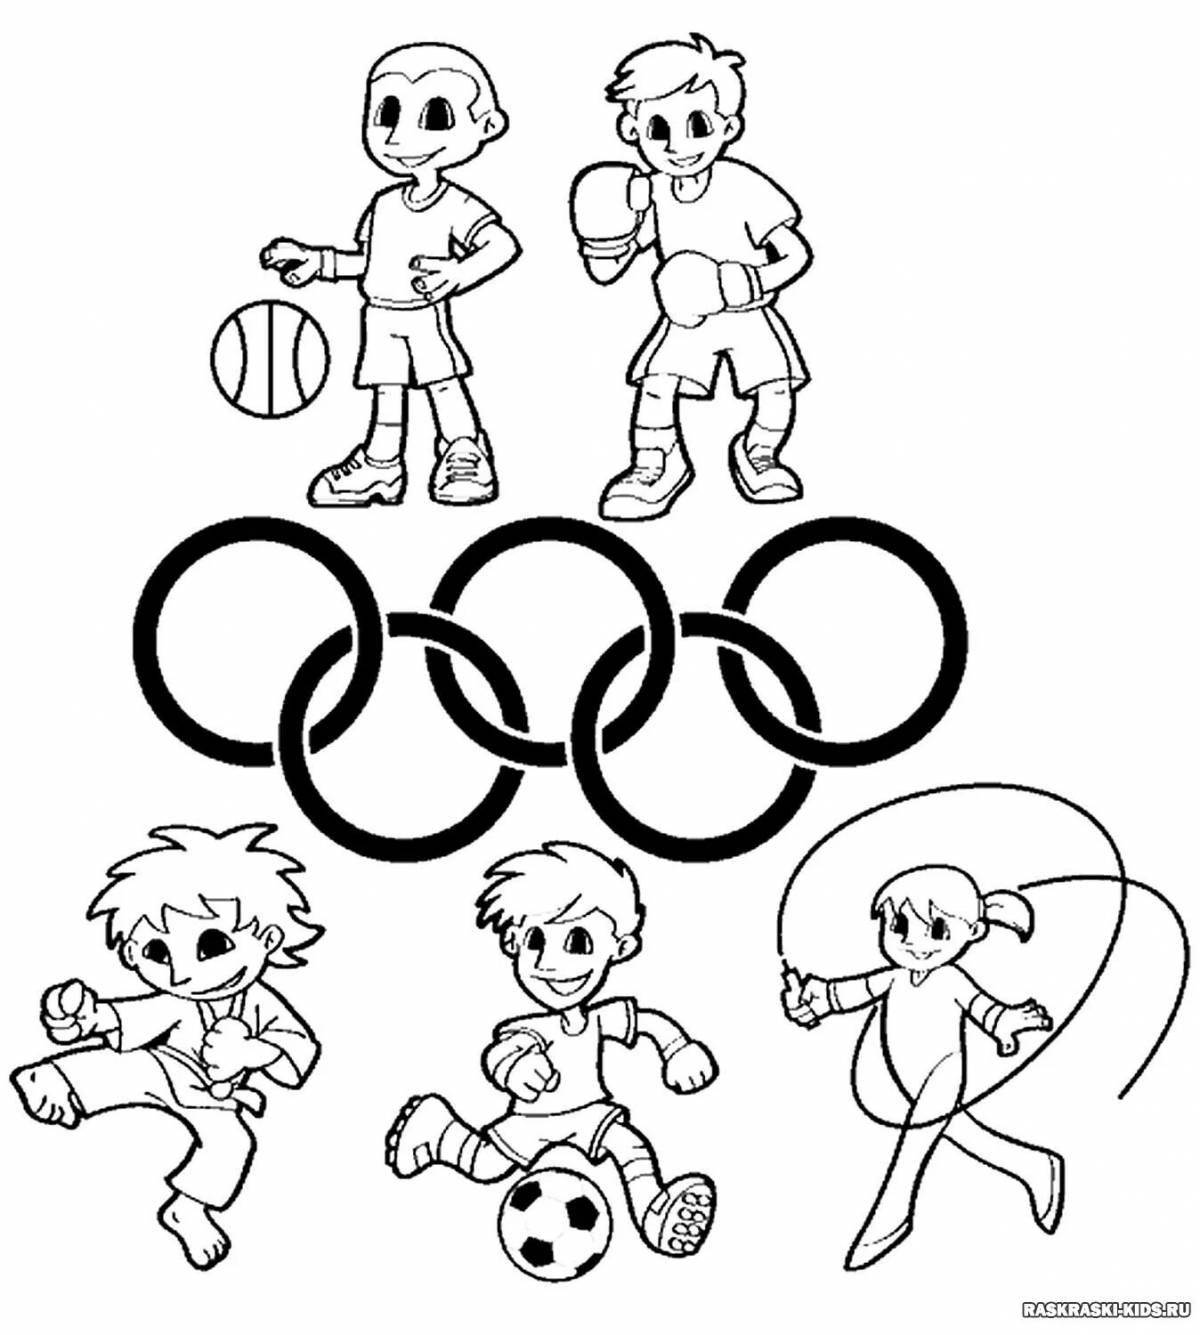 A fun coloring book olympic games for kids